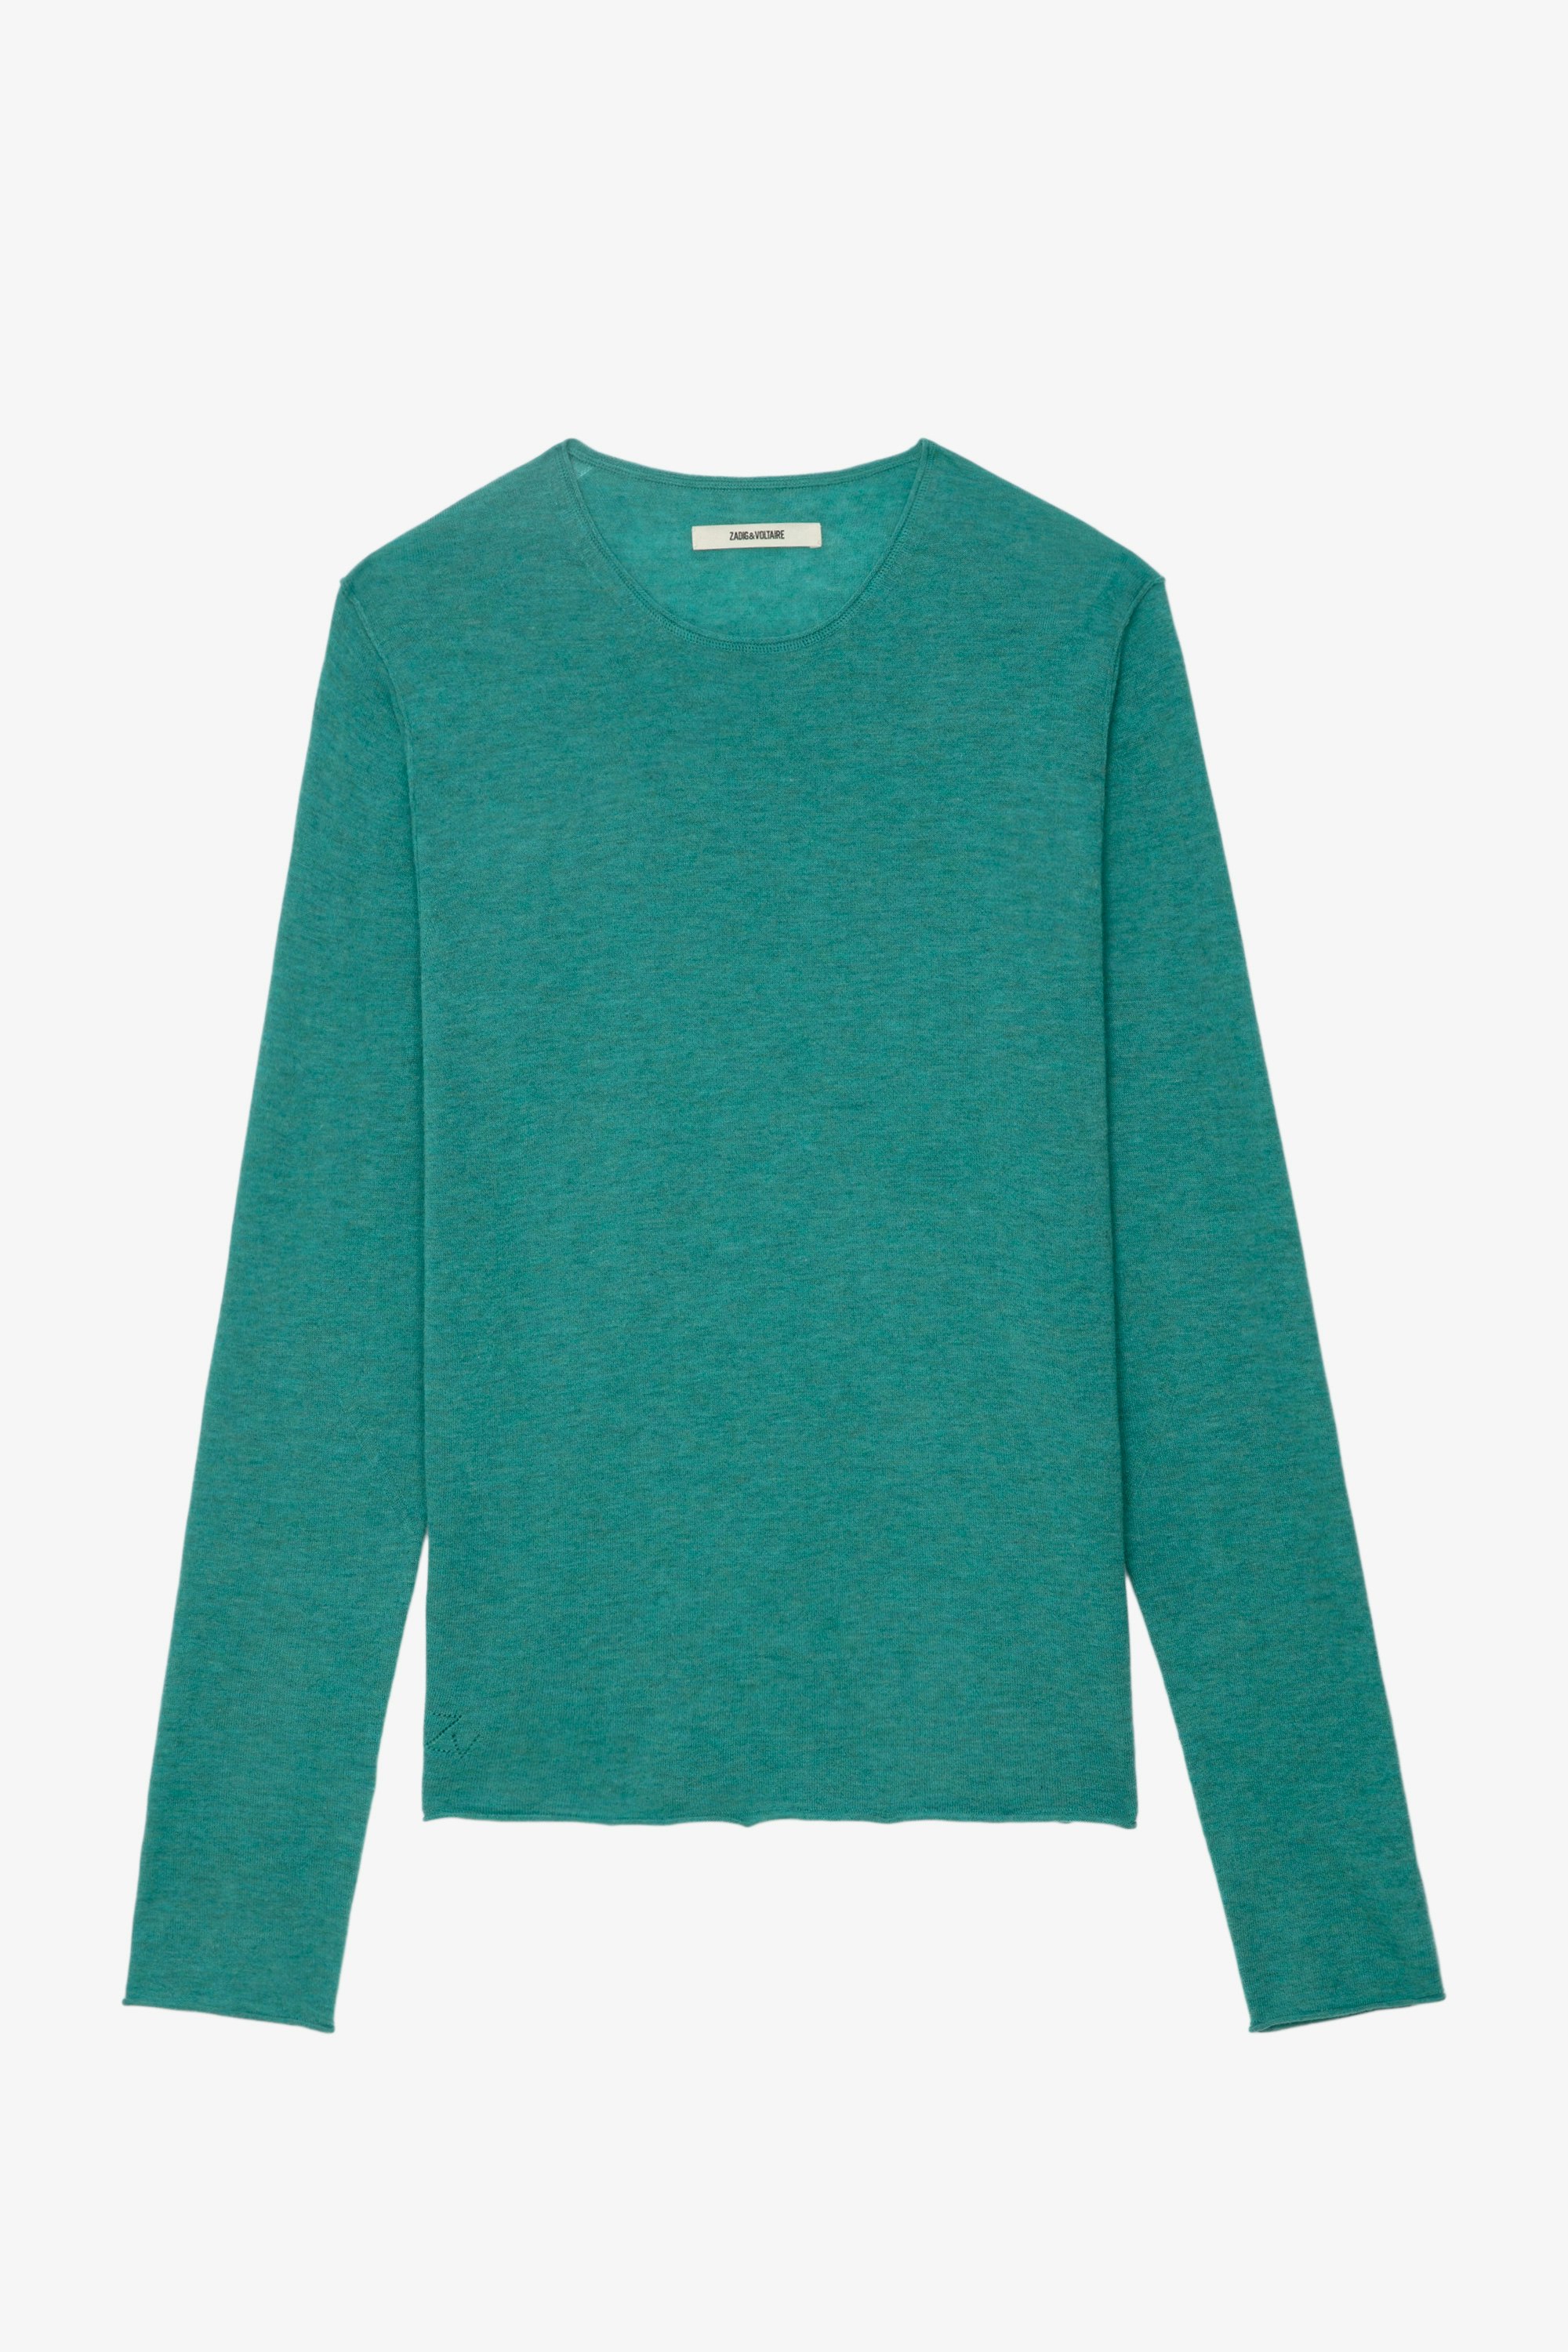 Teiss Cashmere Jumper - Blue green feather cashmere jumper with round neckline and long sleeves.